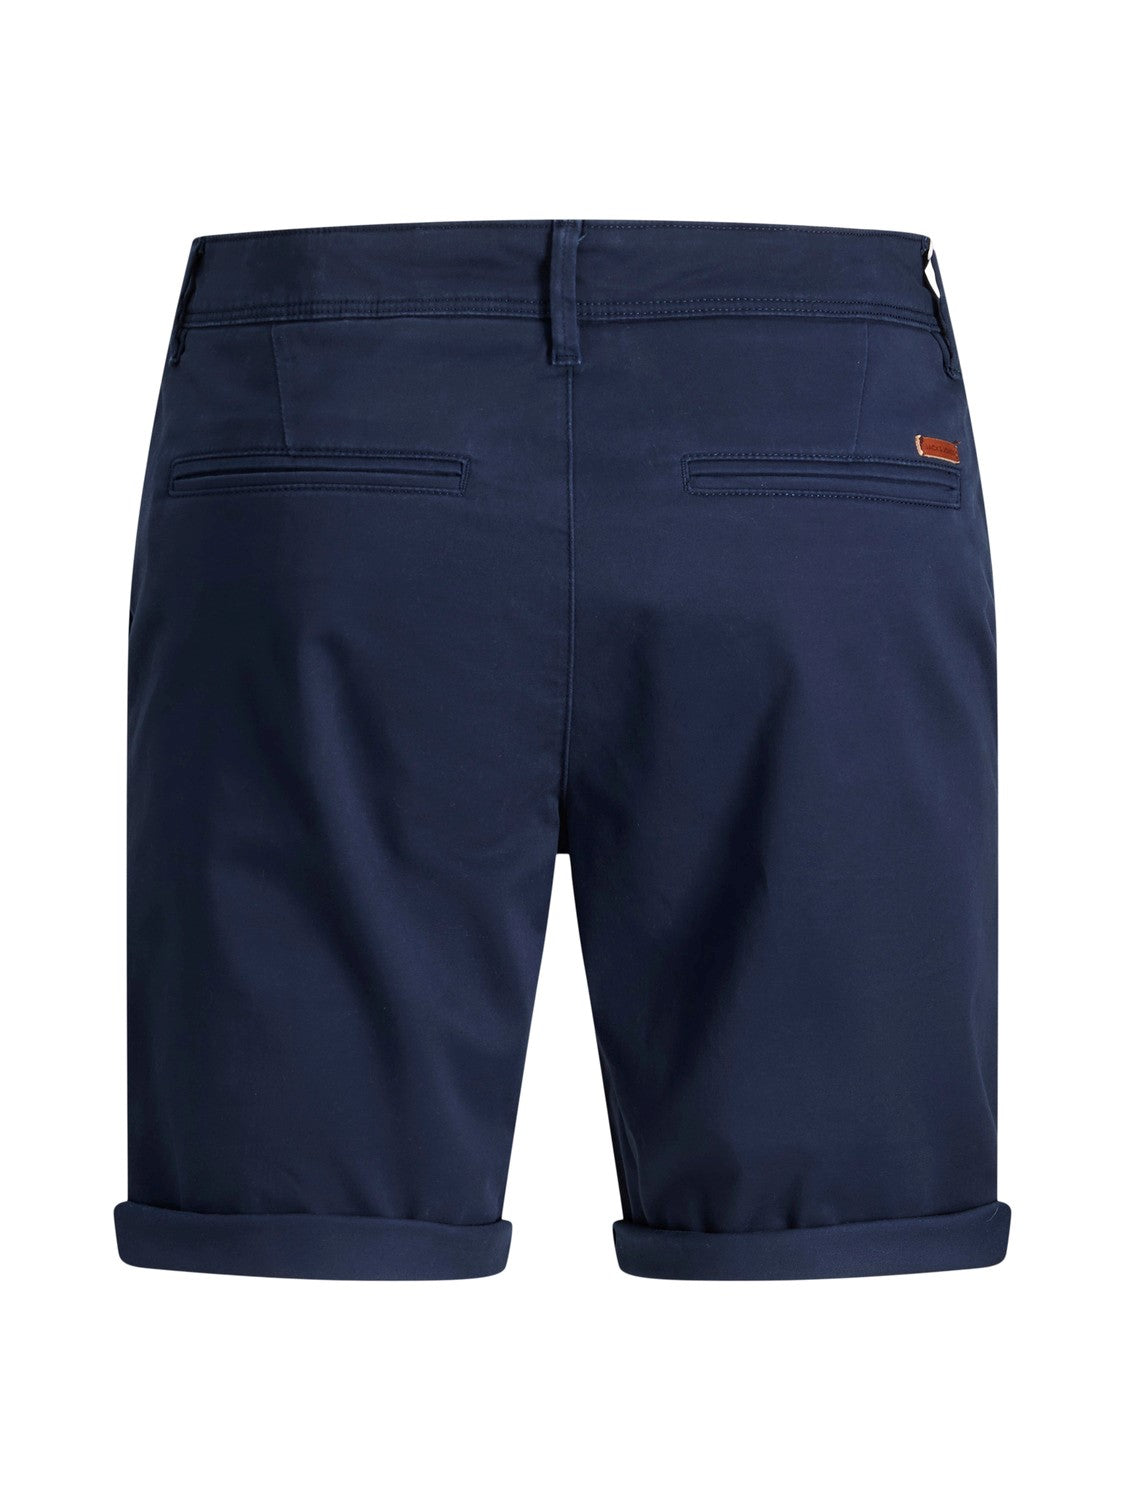 Bowie Junior Boys Navy Shorts-Back View